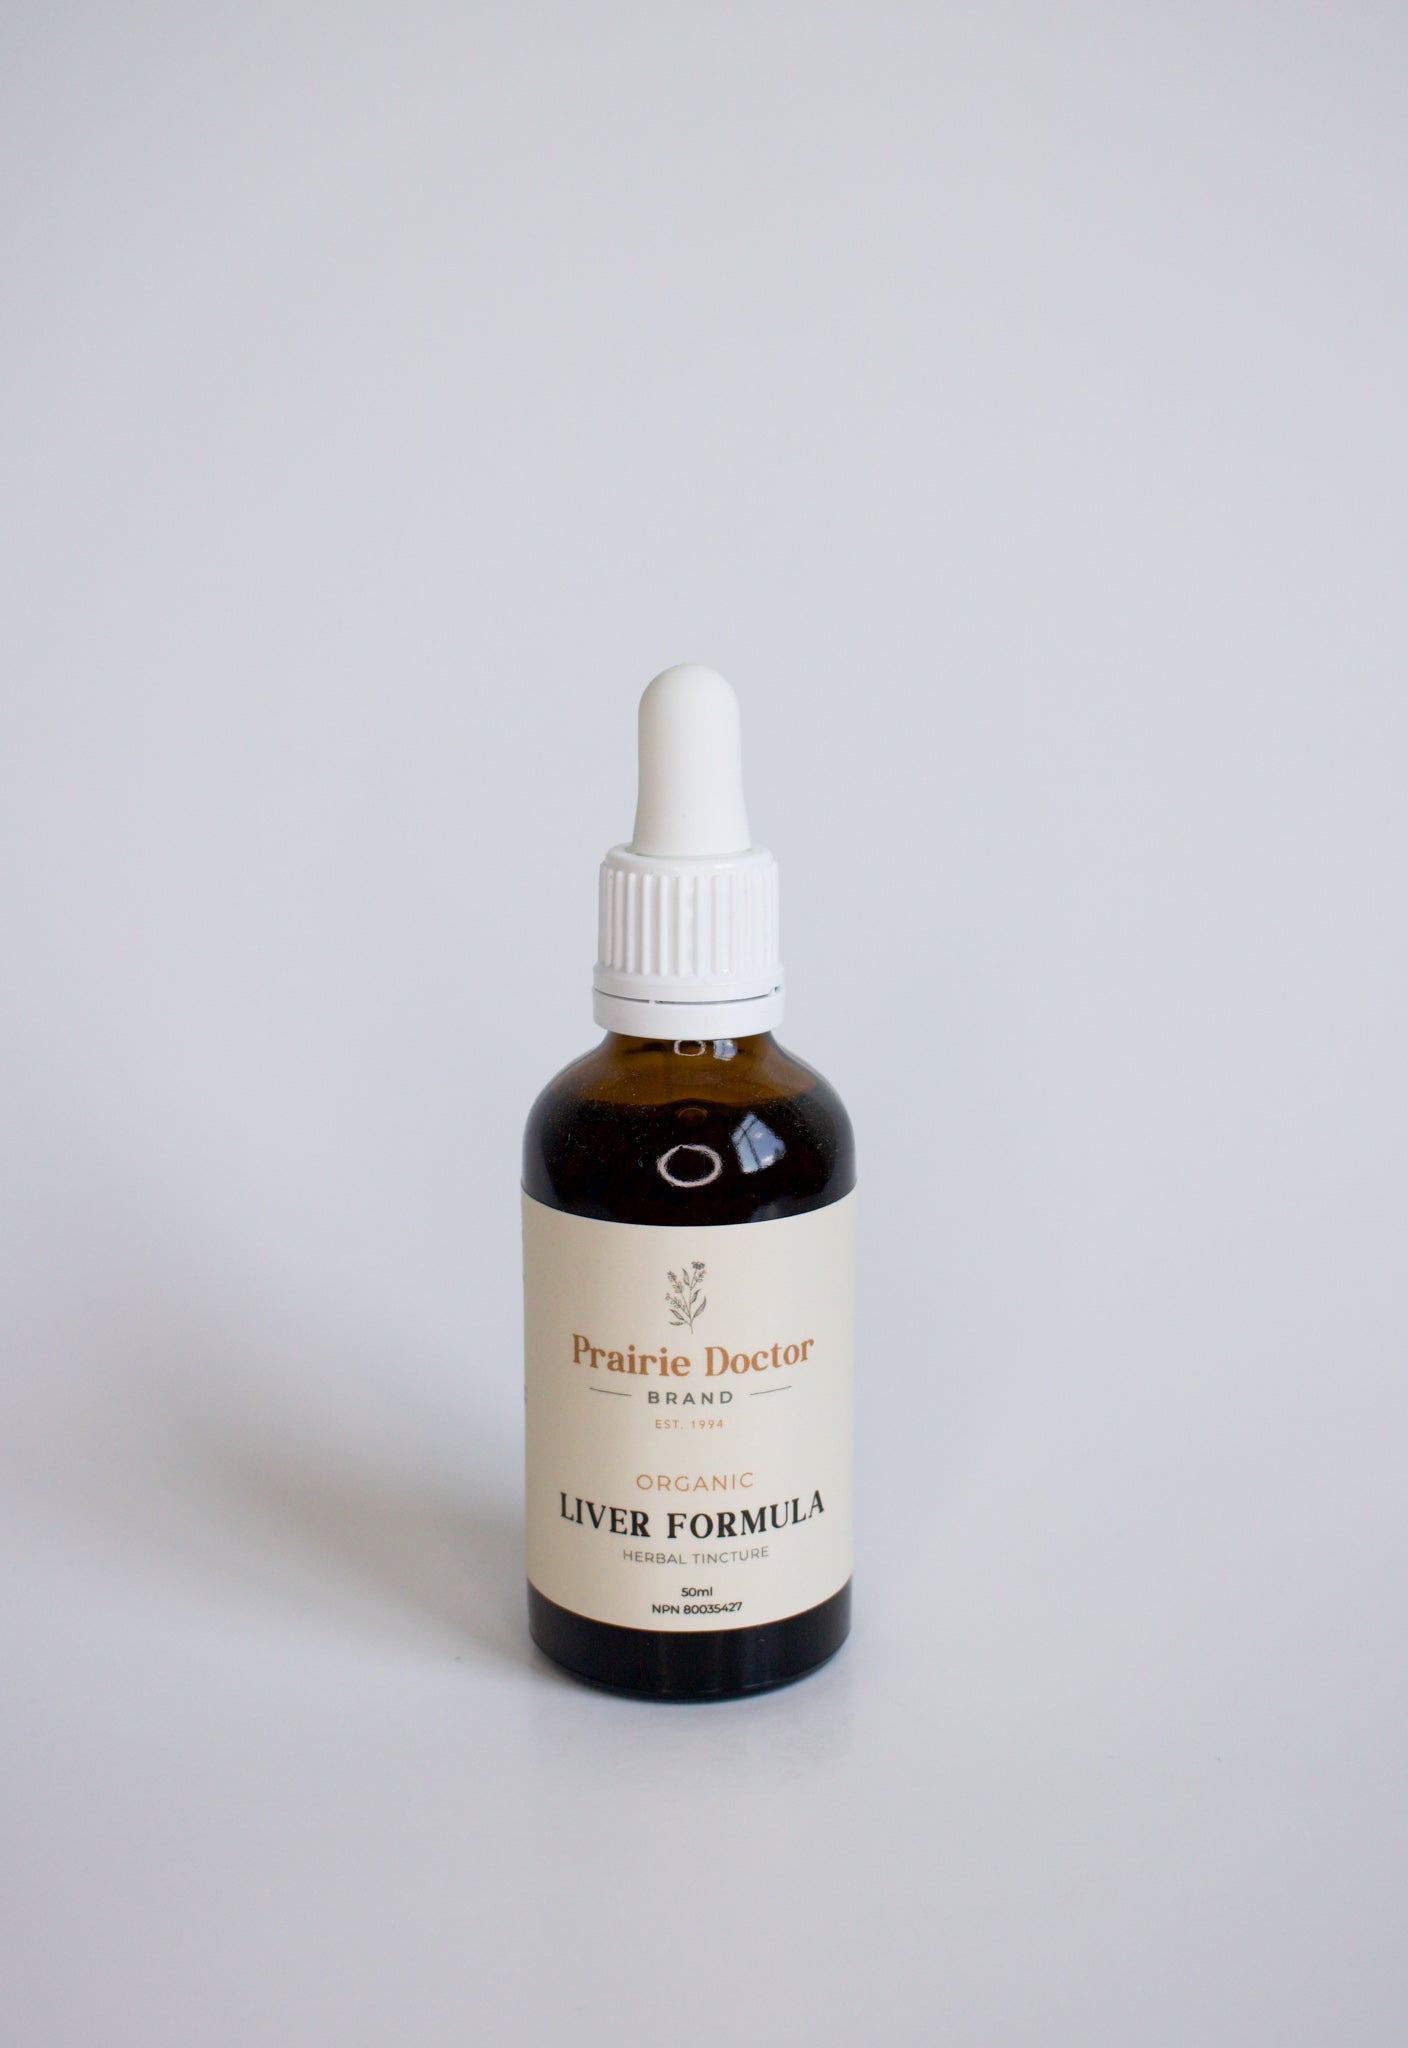 Our organic liver formula herbal tincture can be used to support liver function.